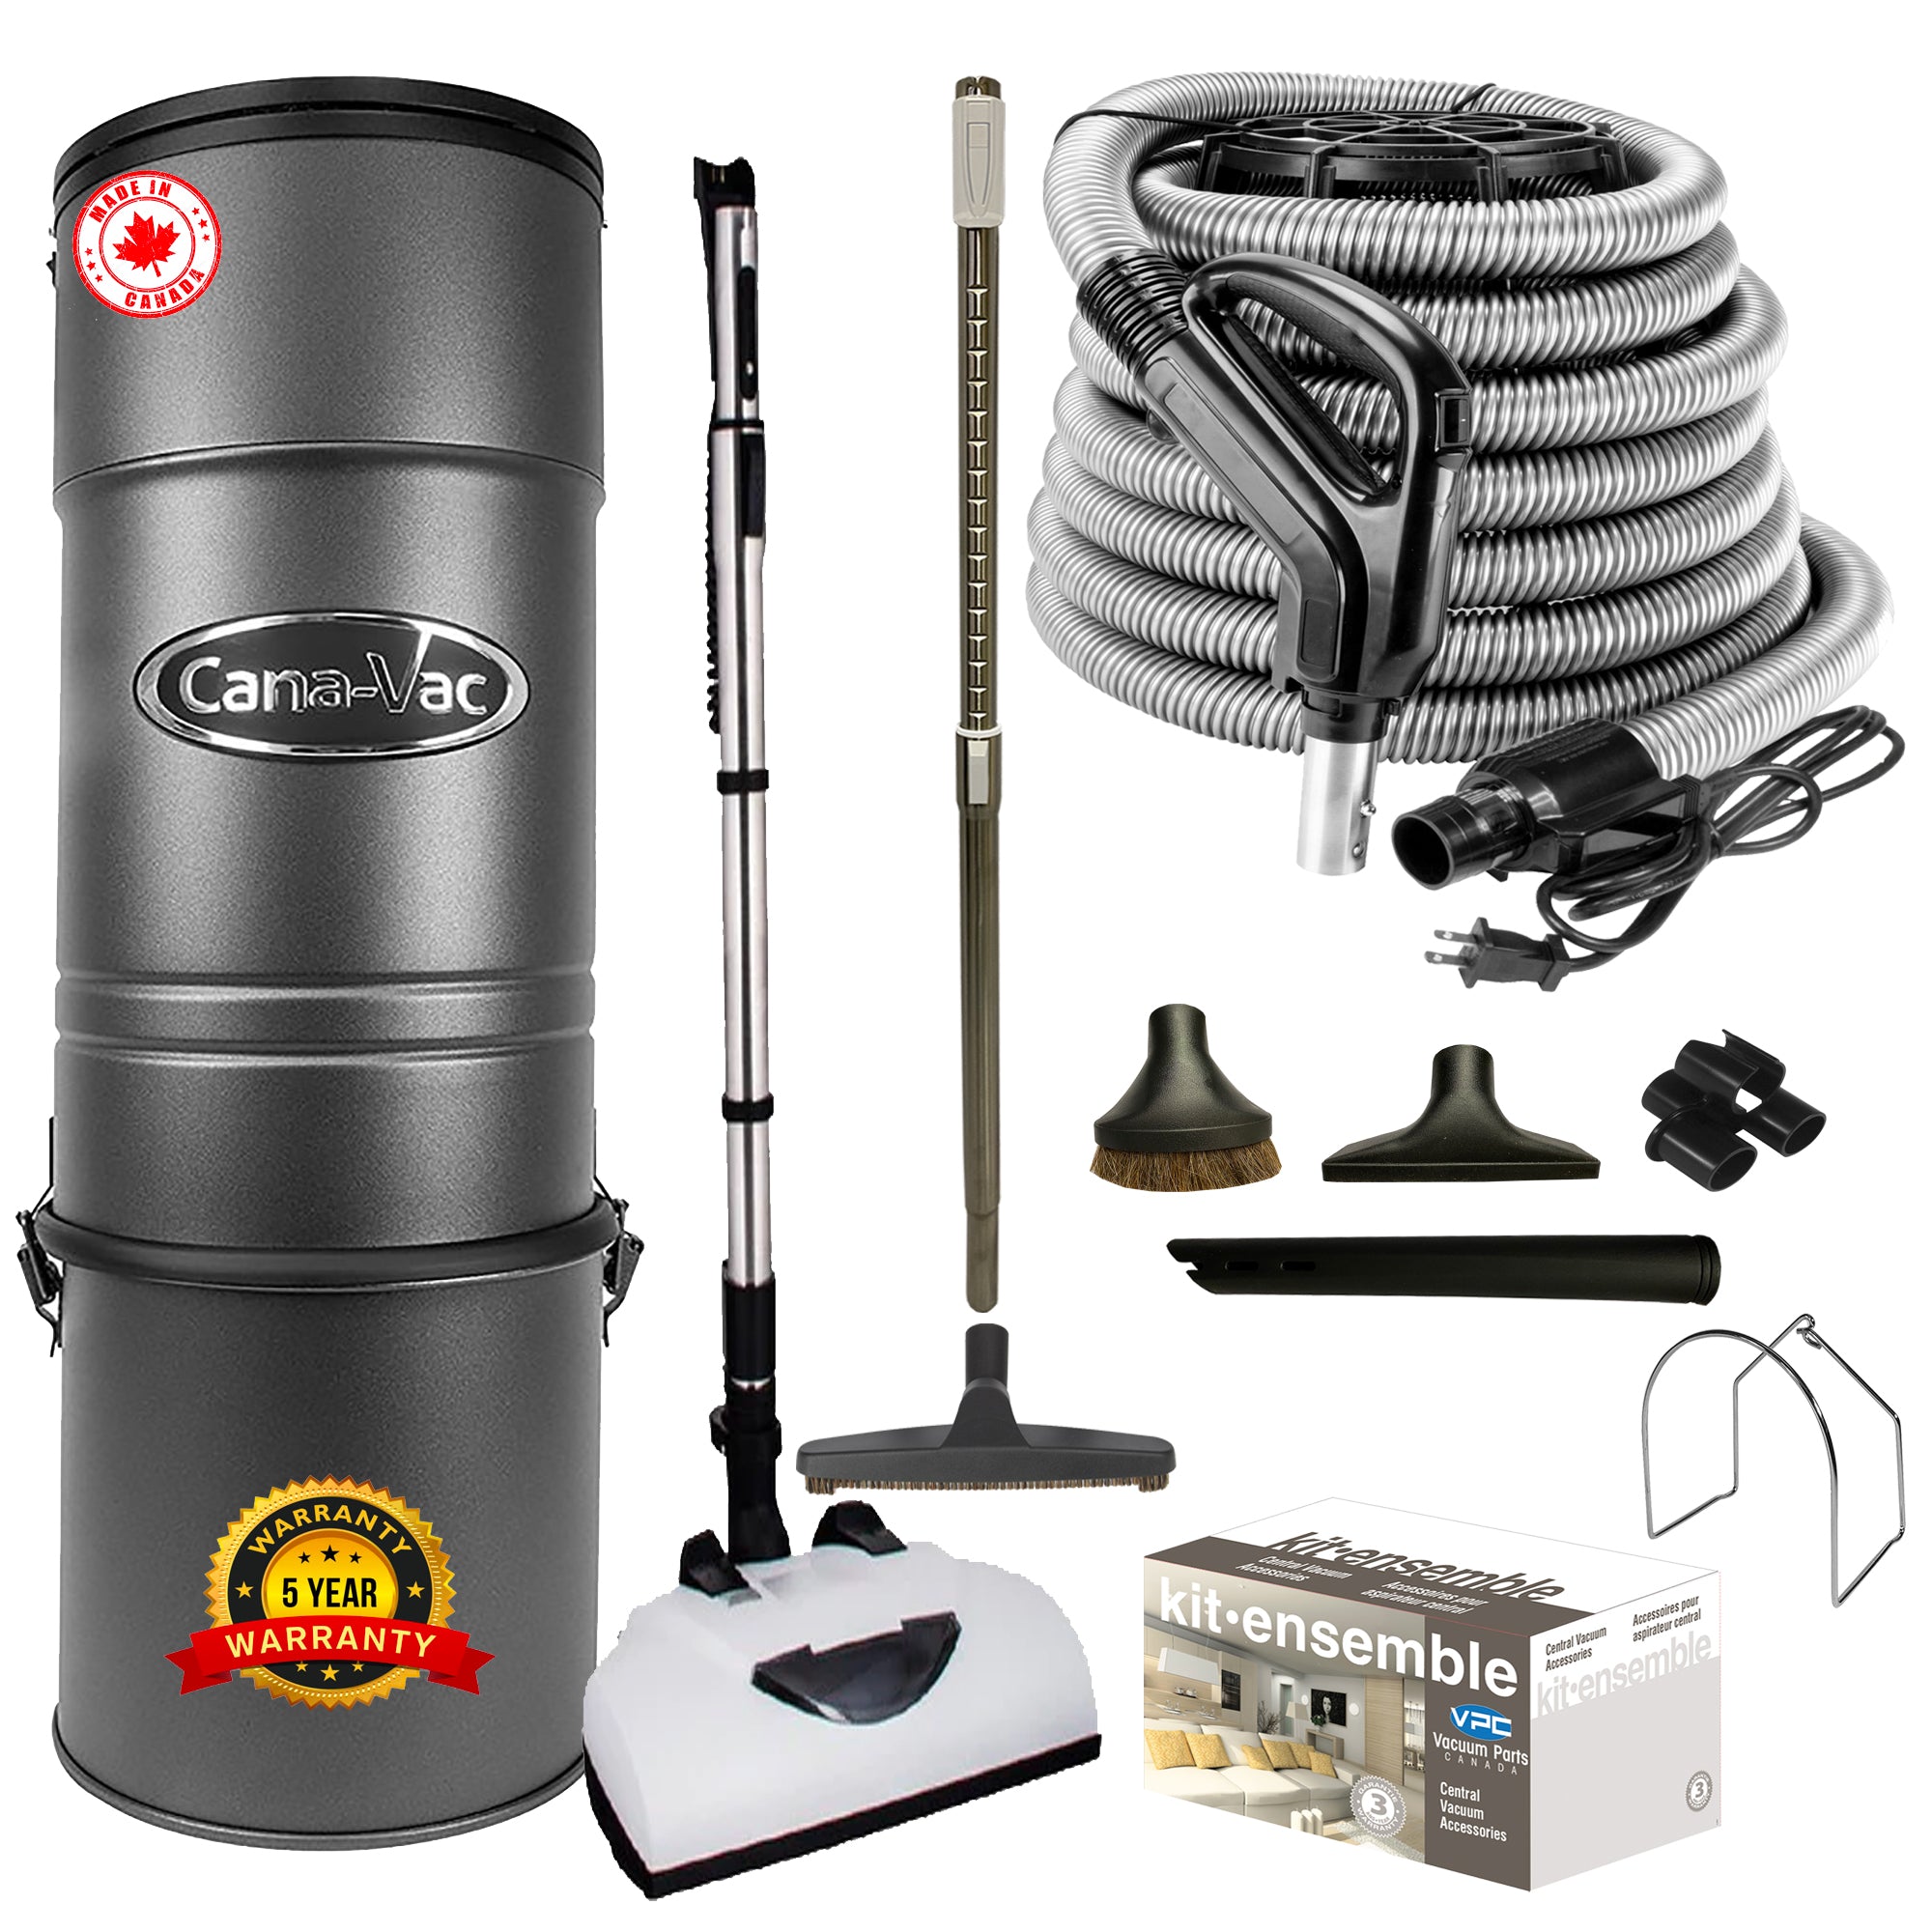 Cana-Vac CV587 Central Vacuum with Deluxe Electric Package (Black)